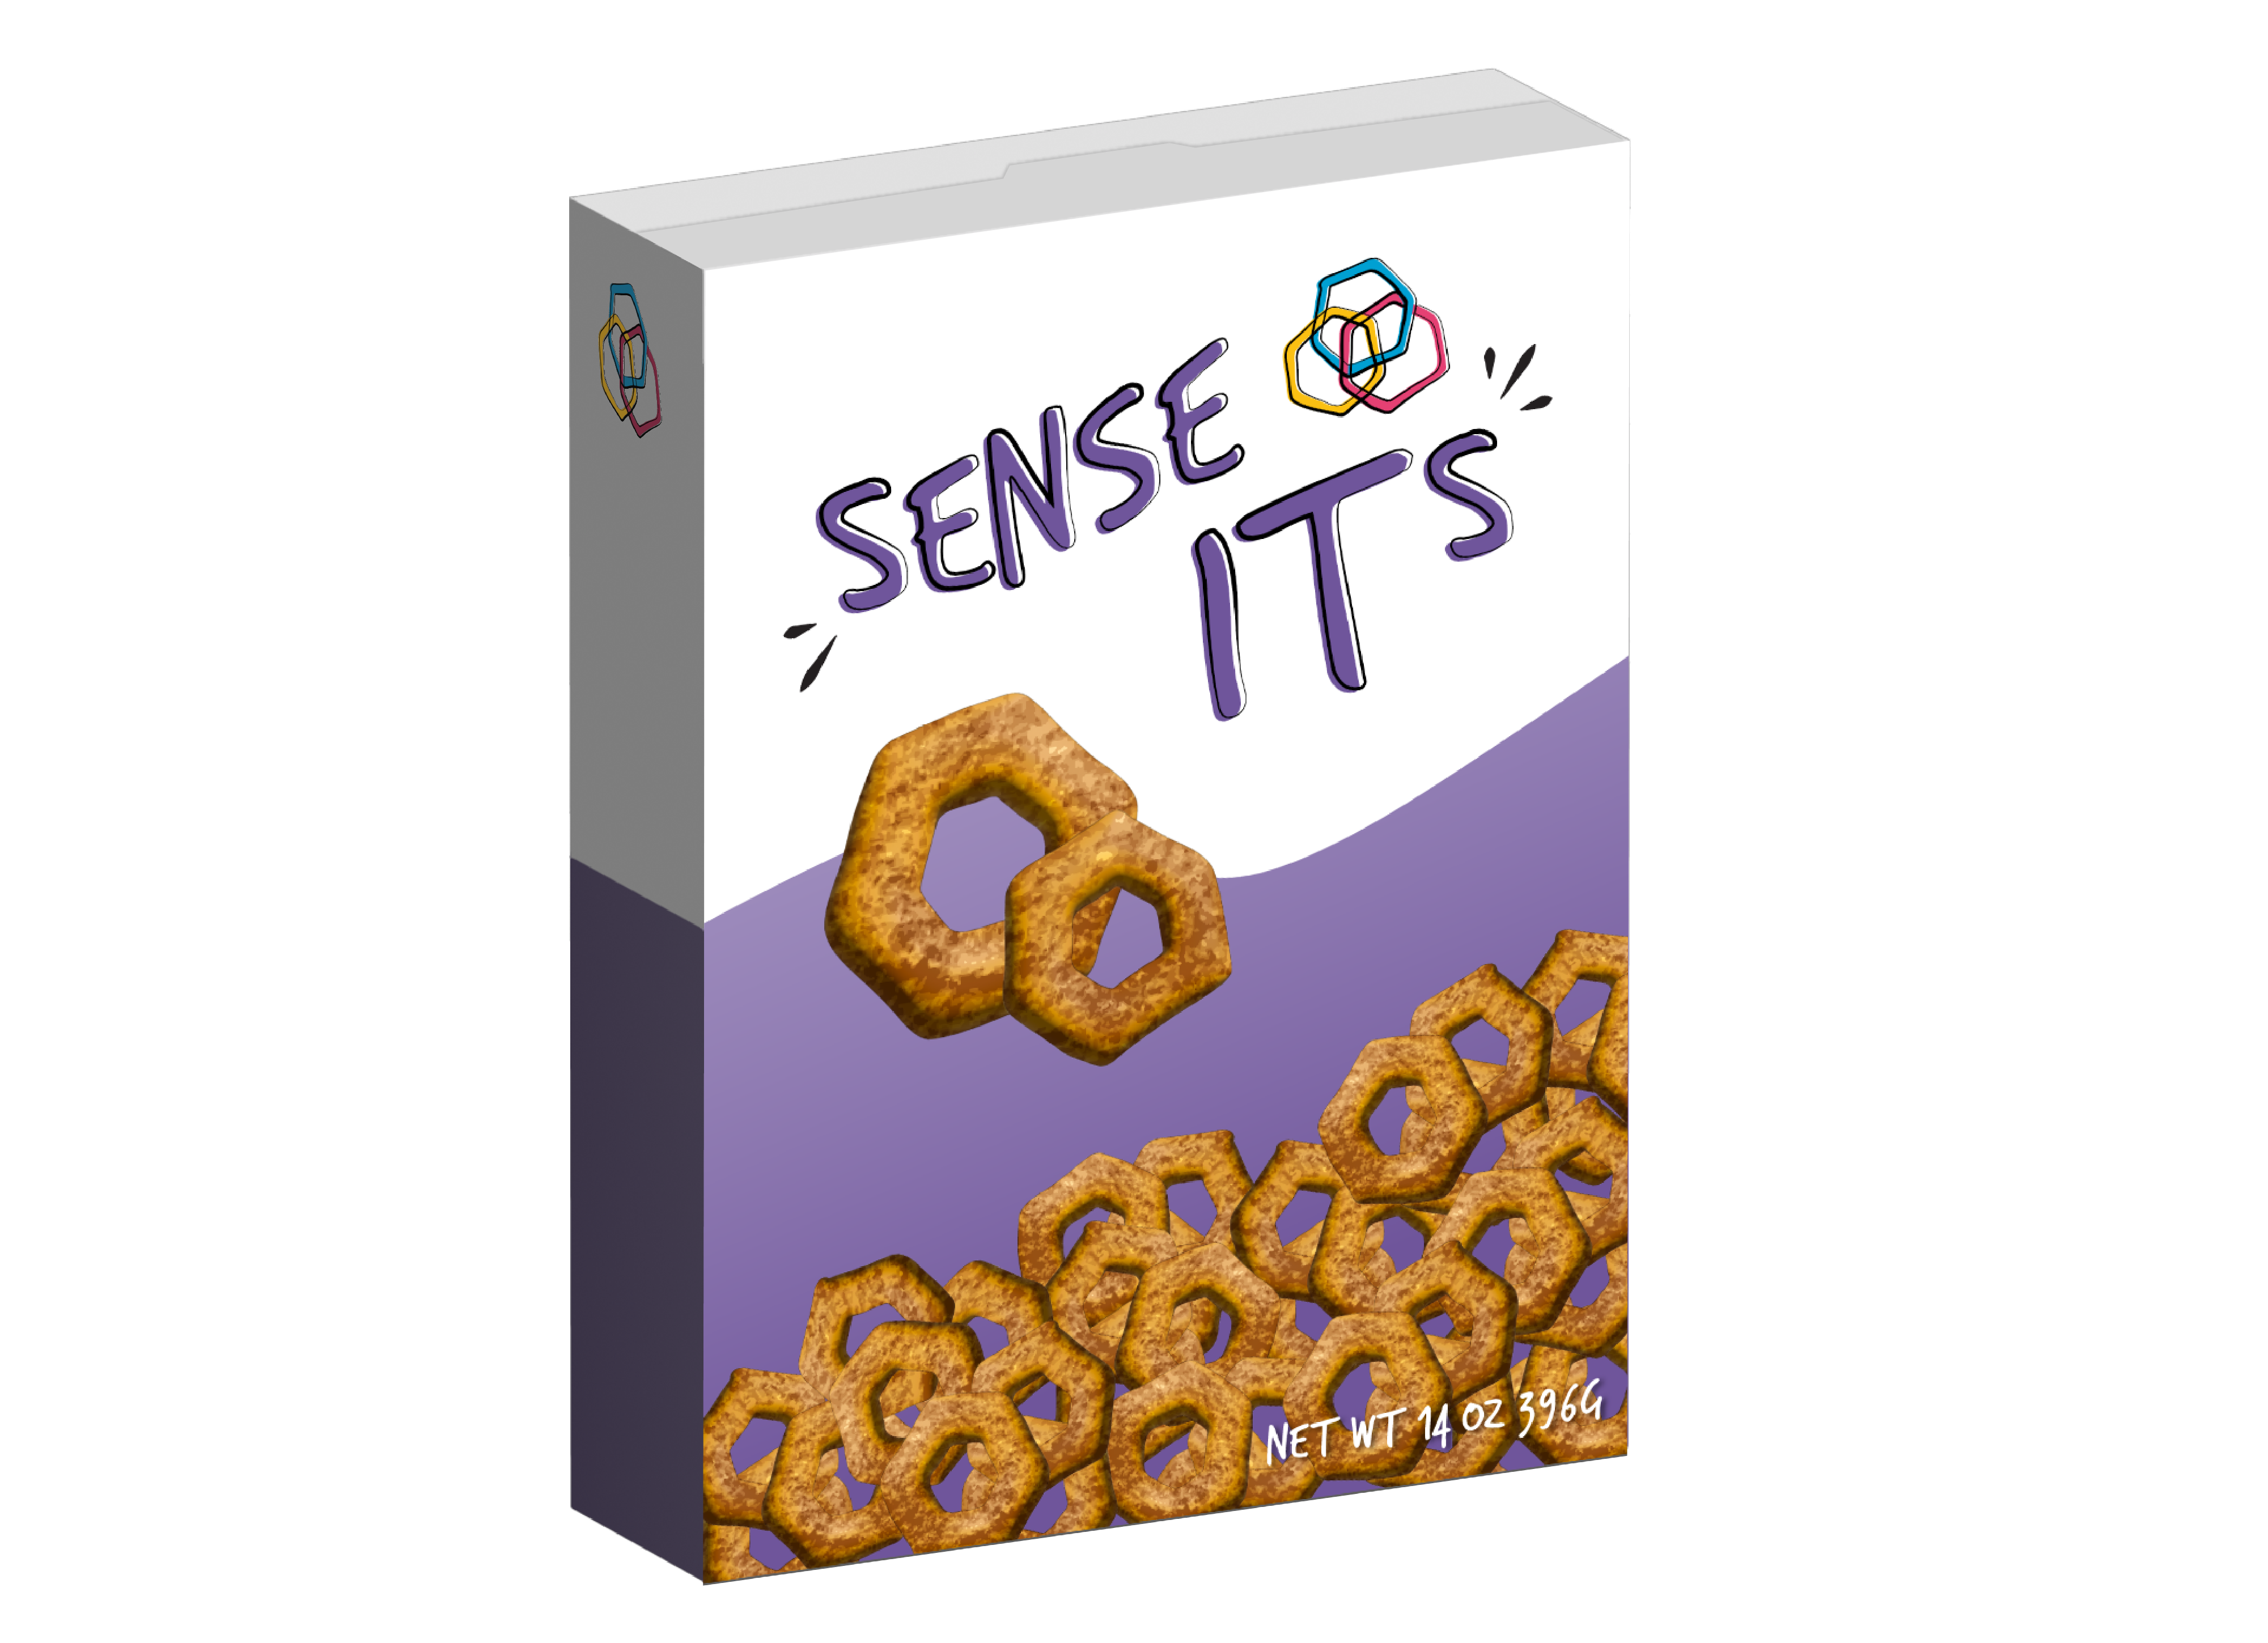 Purple and white box of snack pretzels with text Sense its!